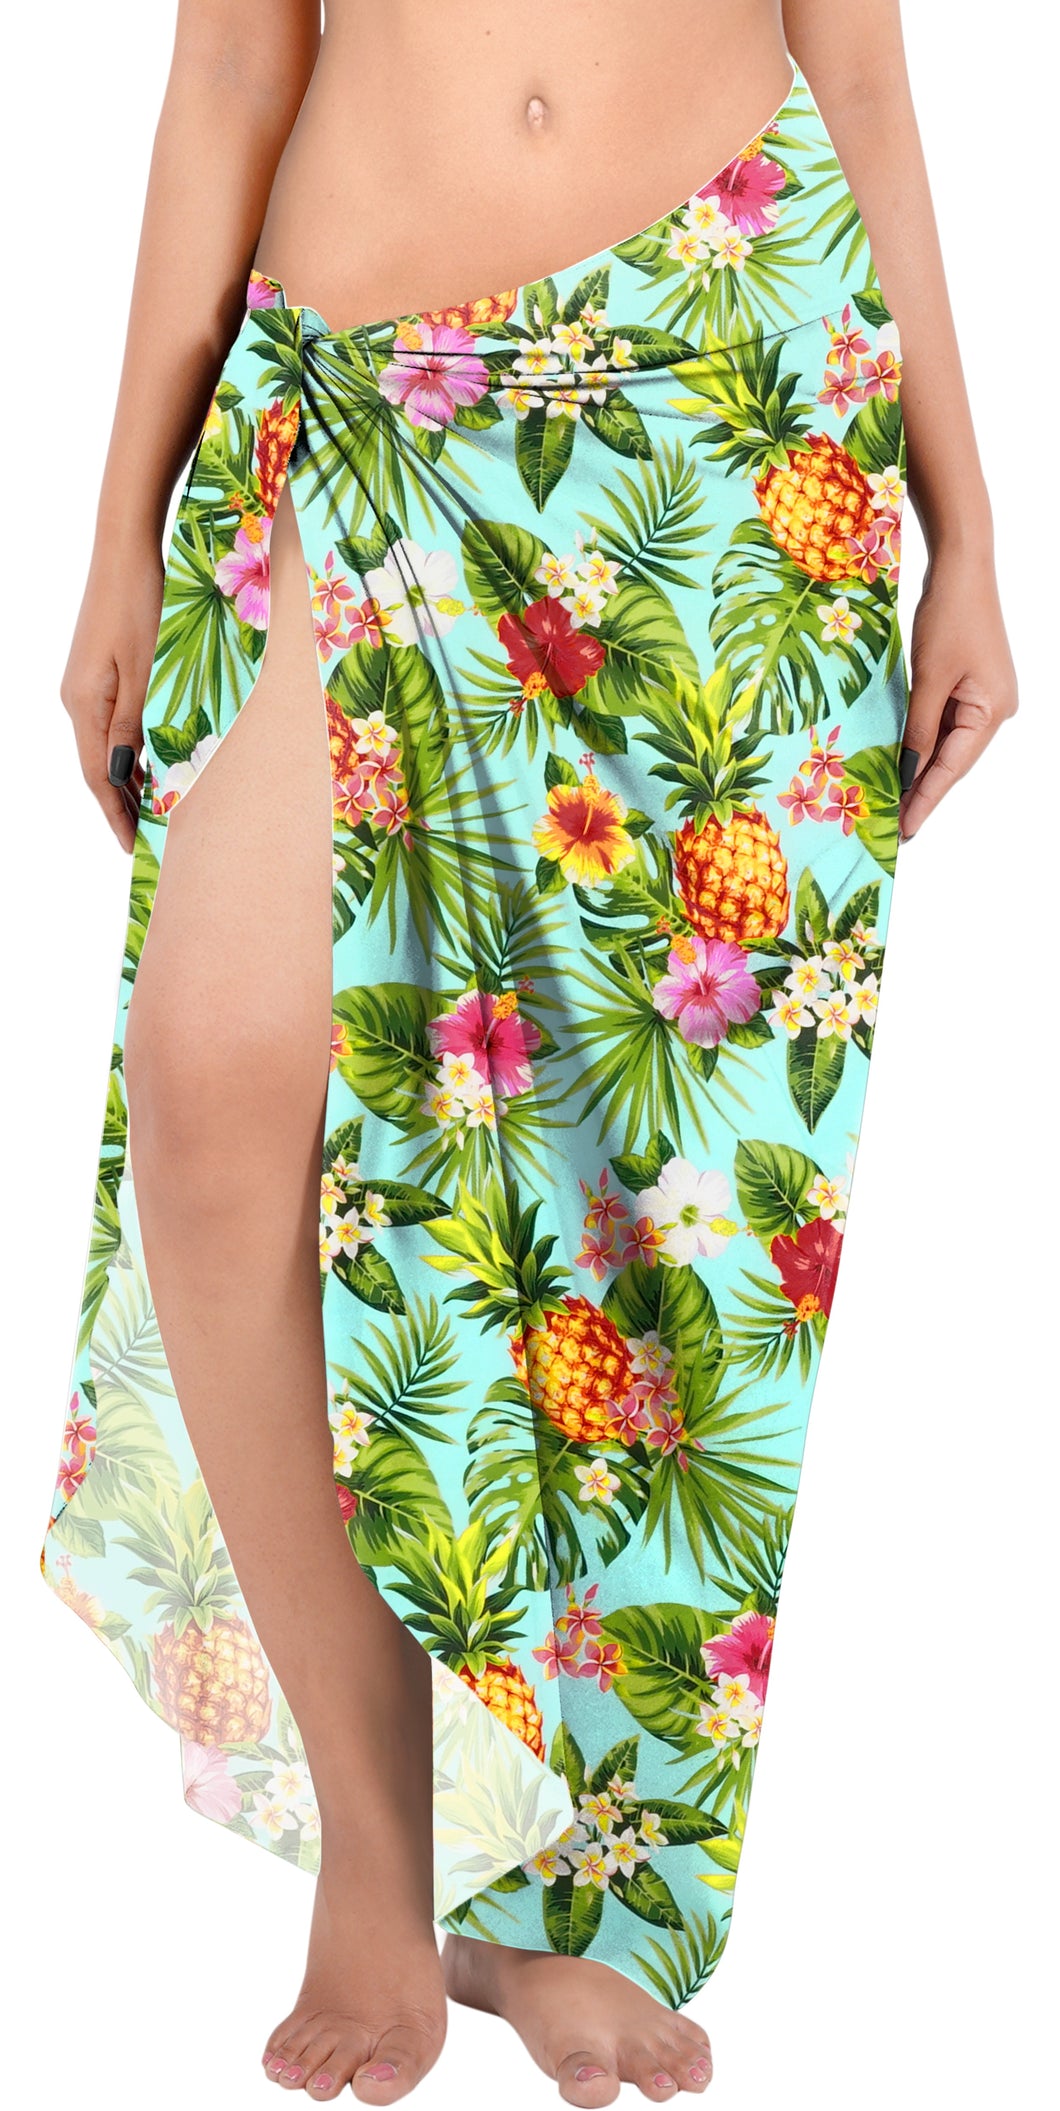 Sea Green Non-Sheer Beach Wrap For Women with Allover Pineapple, Leaves and Floral Print